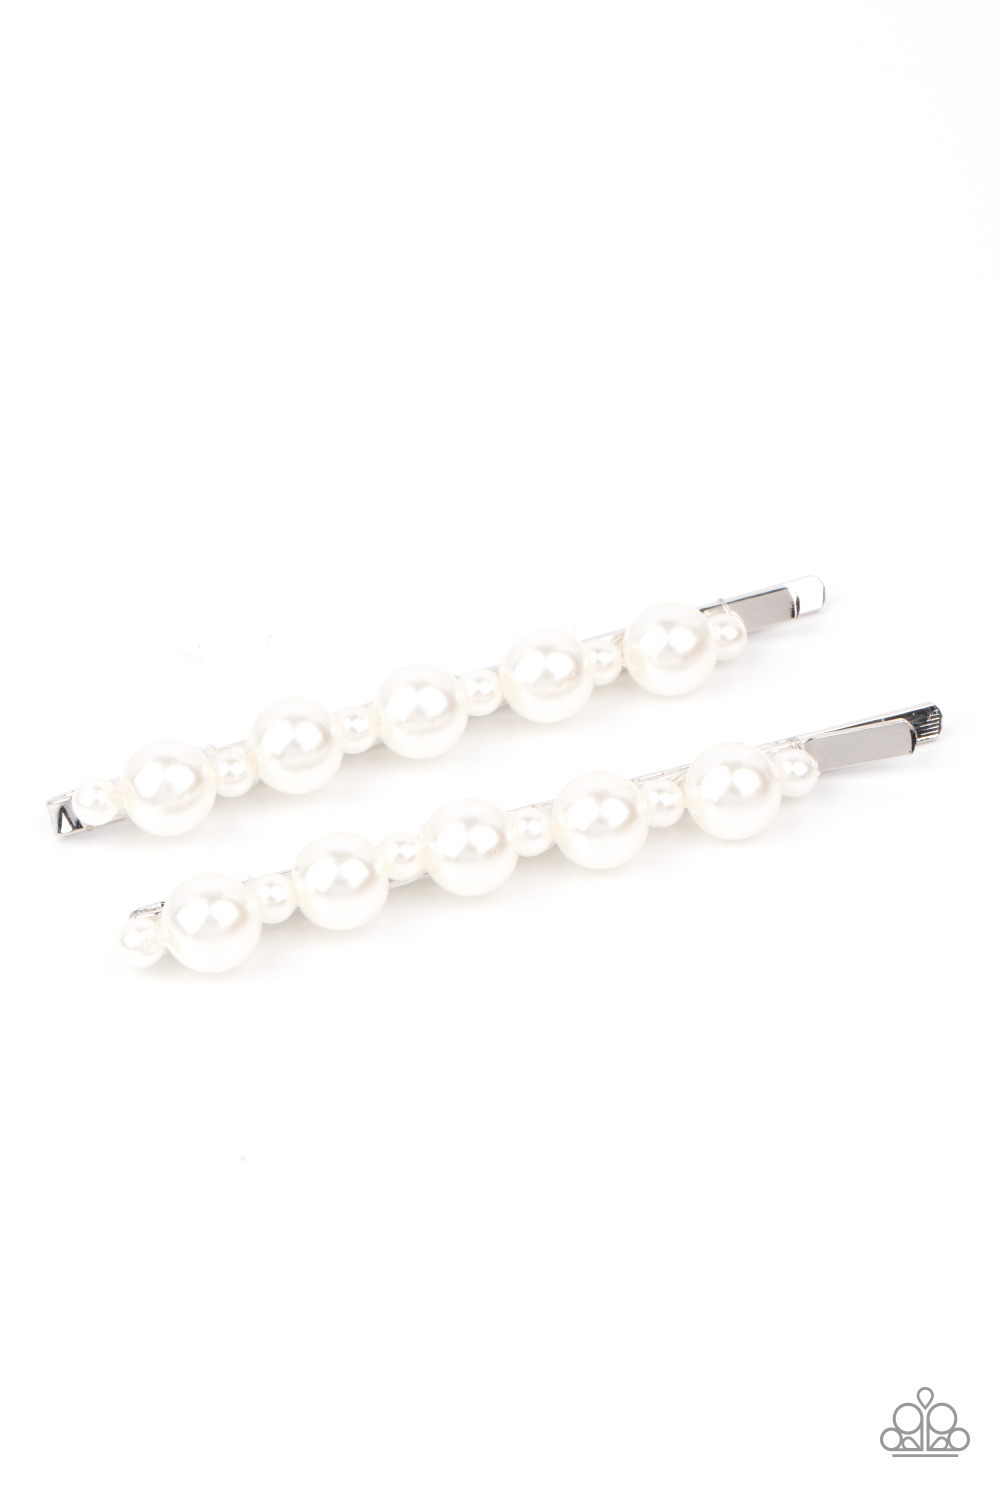 Put A Pin In It - White - Paparazzi Accessories Hair Accessory